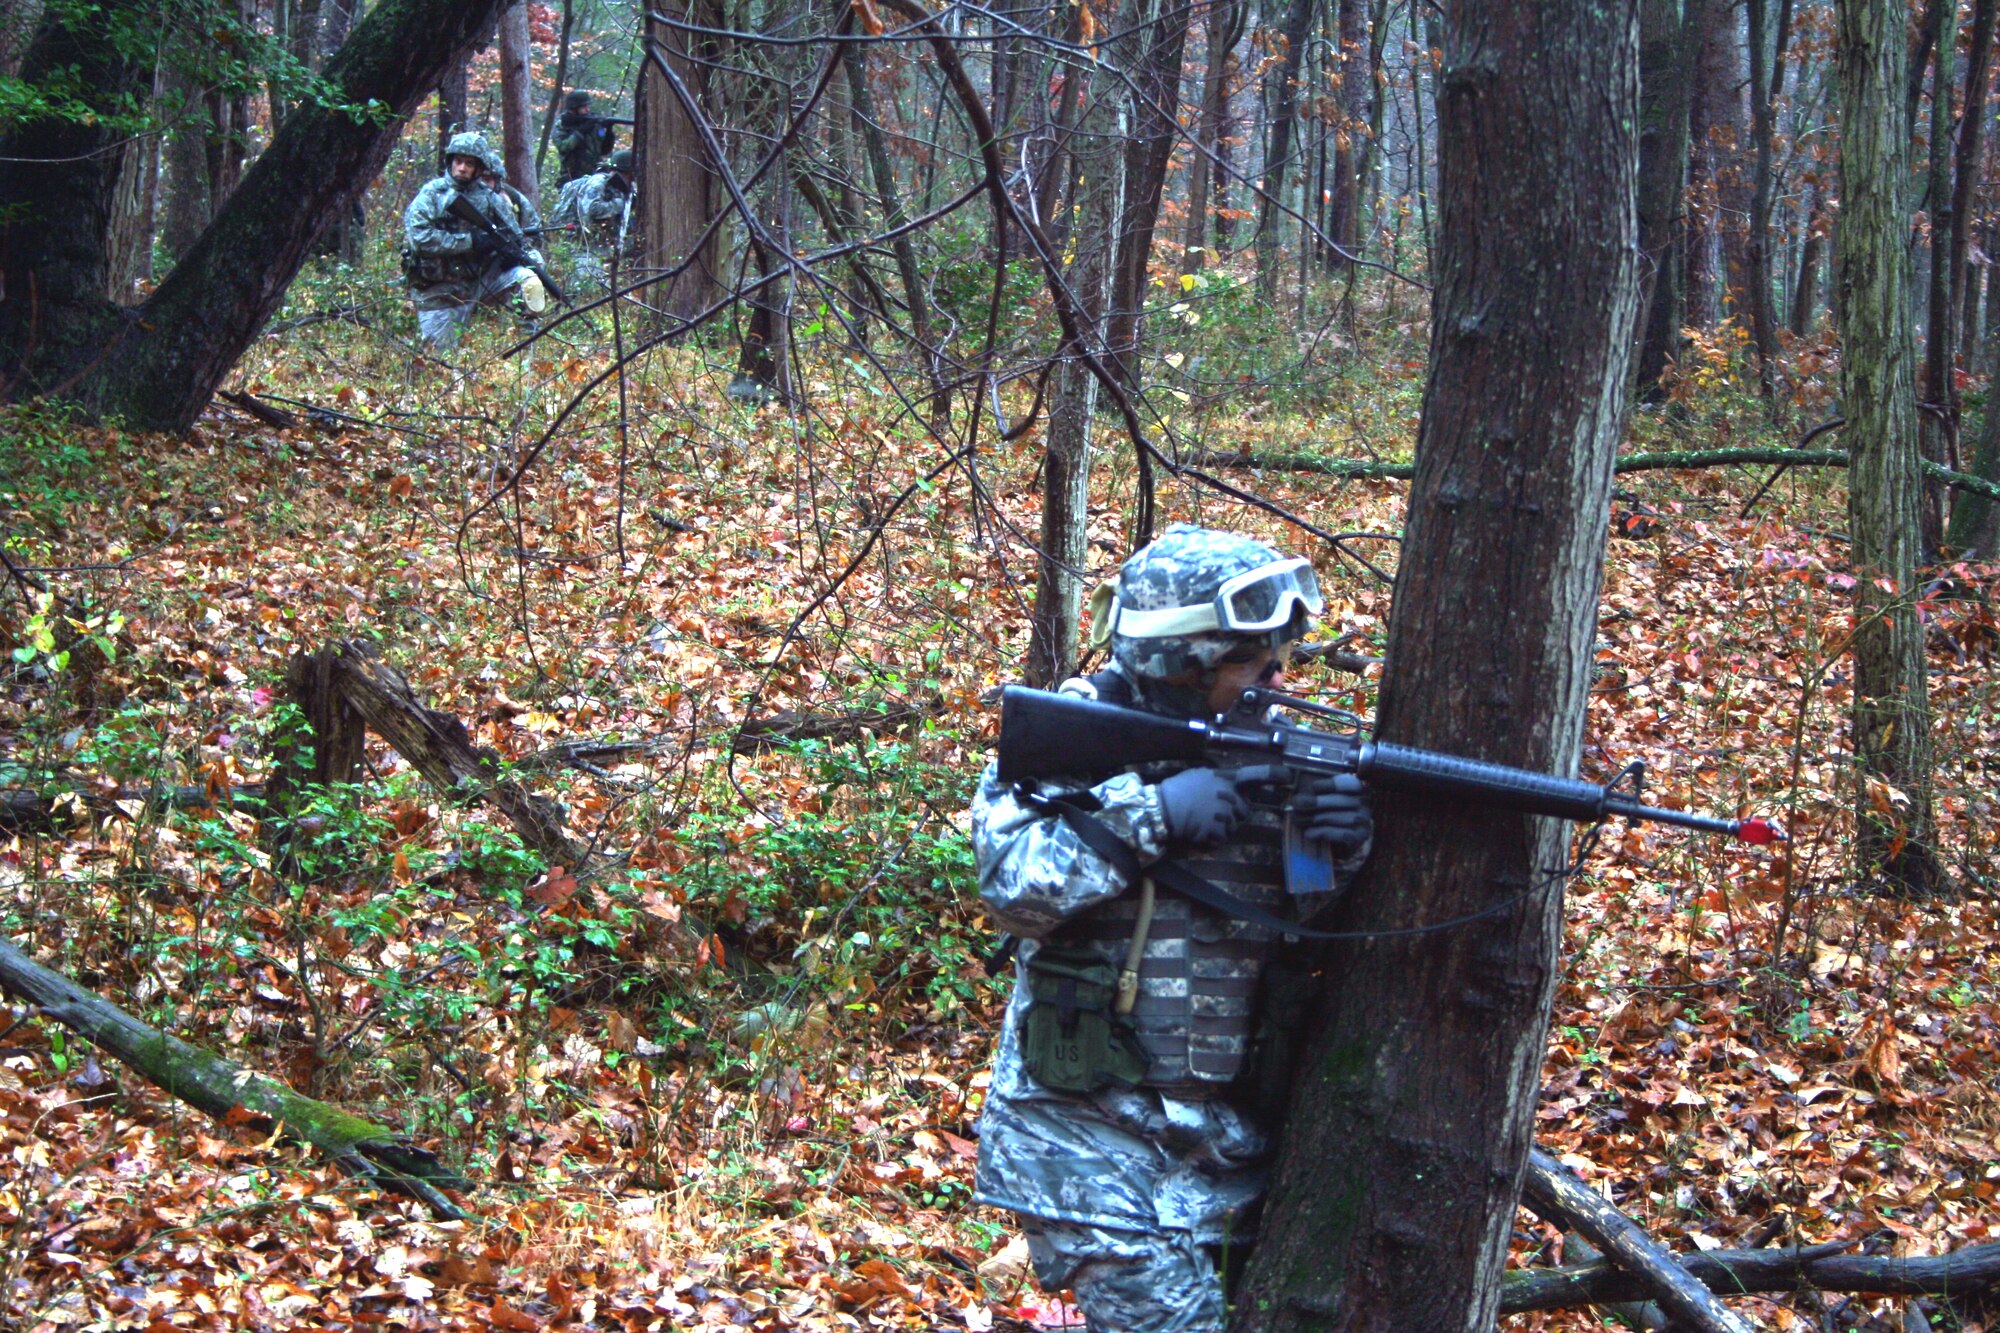 Students in the Combat Airman Skills Training Course 10-1A practices dismounted patrolling tactics during course training on Nov. 12, 2009, on a range at Joint Base McGuire-Dix-Lakehurst, N.J.  The course, taught by the U.S. Air Force Expeditionary Center's 421st Combat Training Squadron, prepares Airmen for upcoming deployments.  (U.S. Air Force Photo/Staff Sgt. Robert Sizelove)